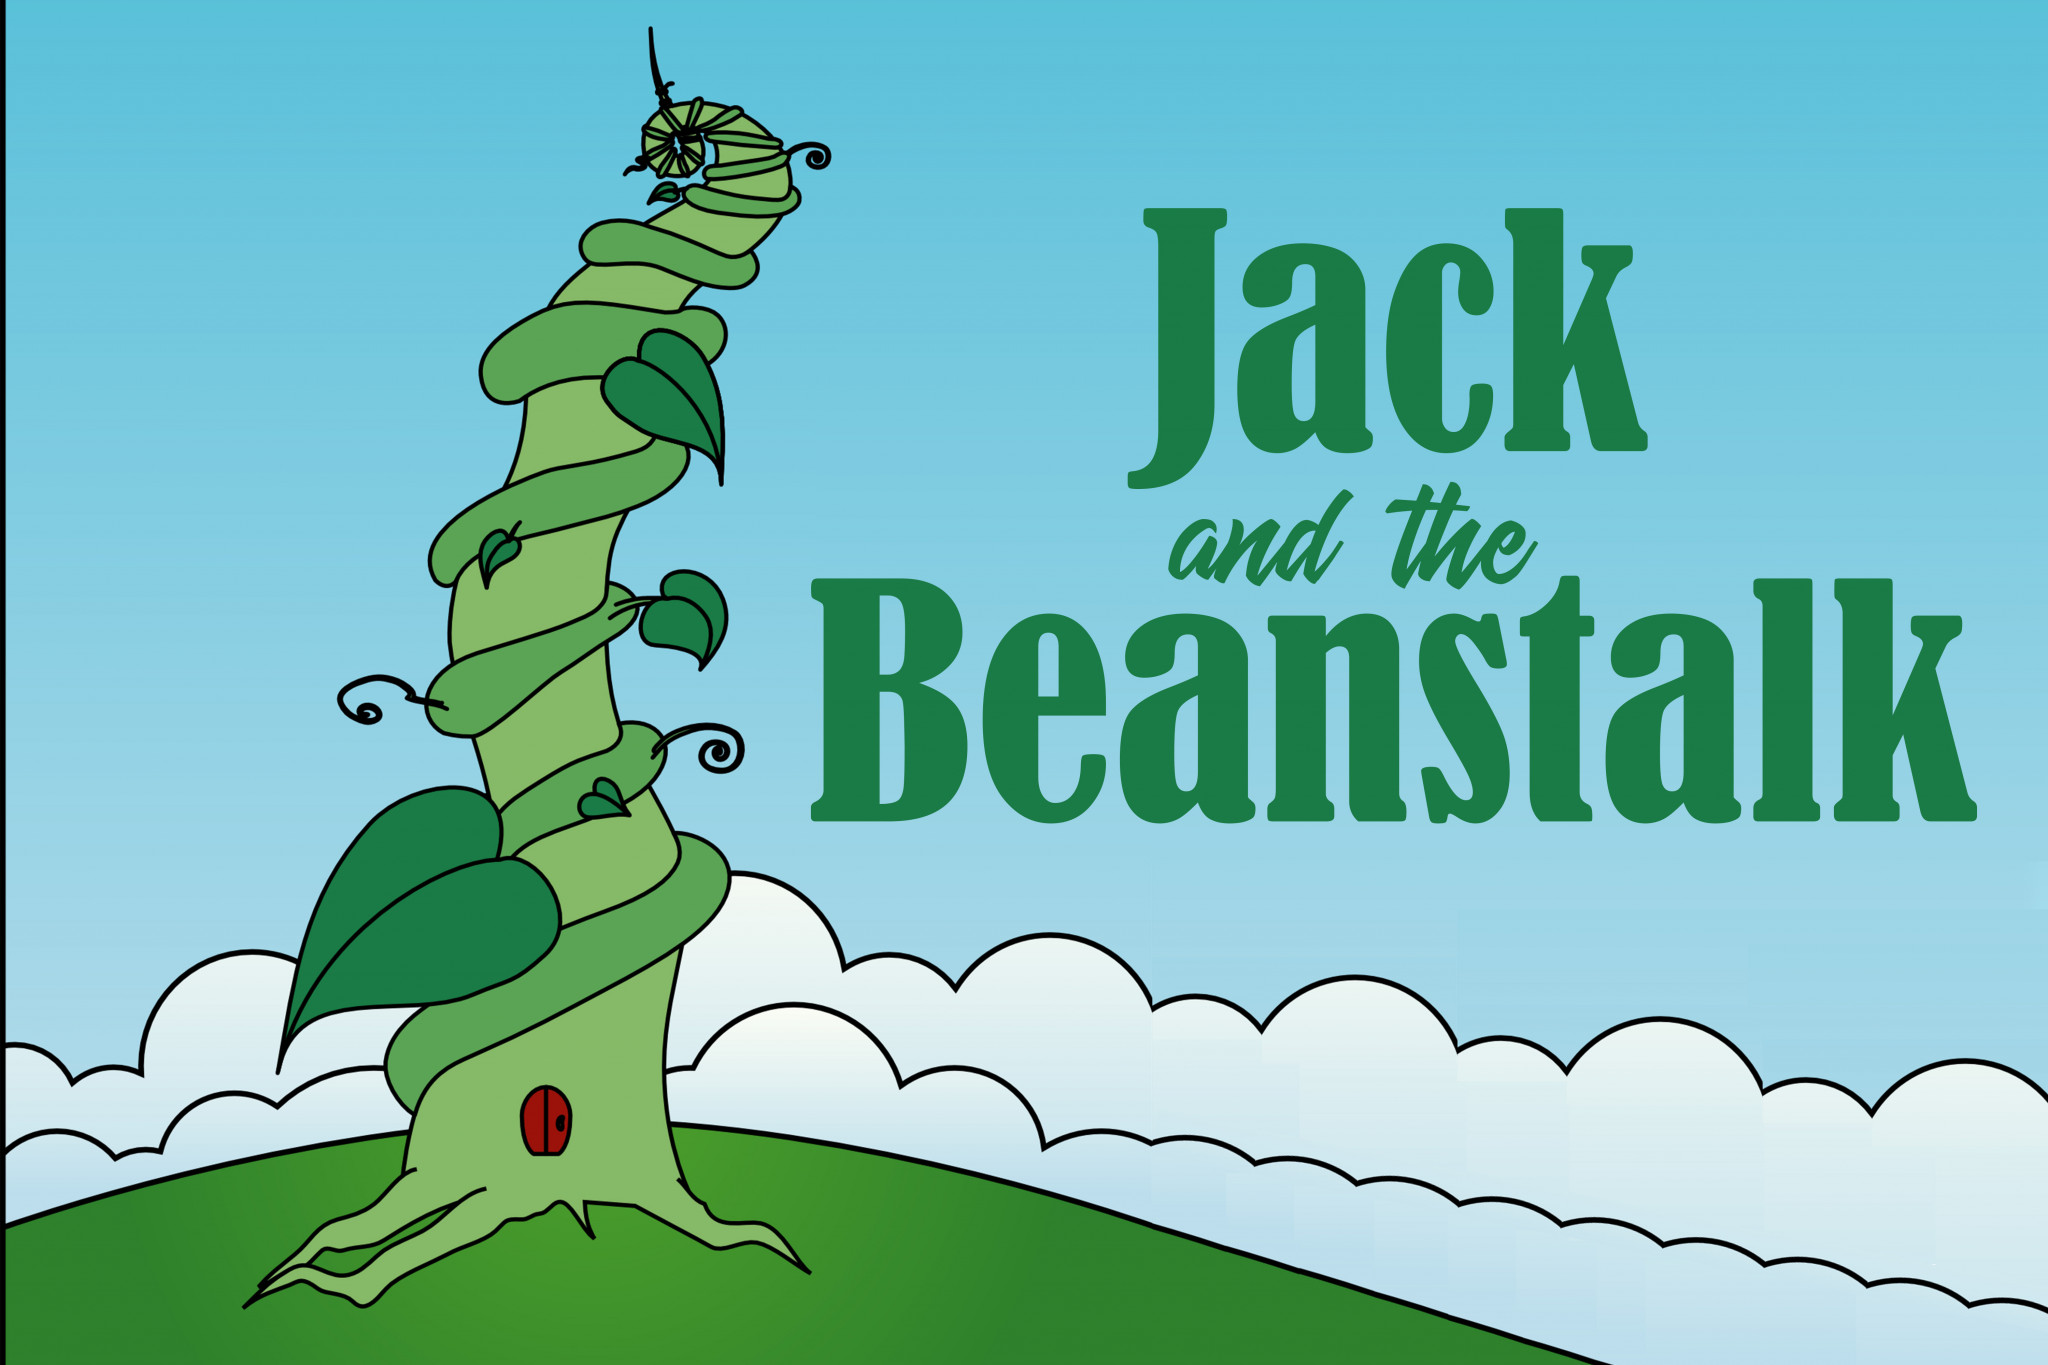 thesis statement of jack and the beanstalk